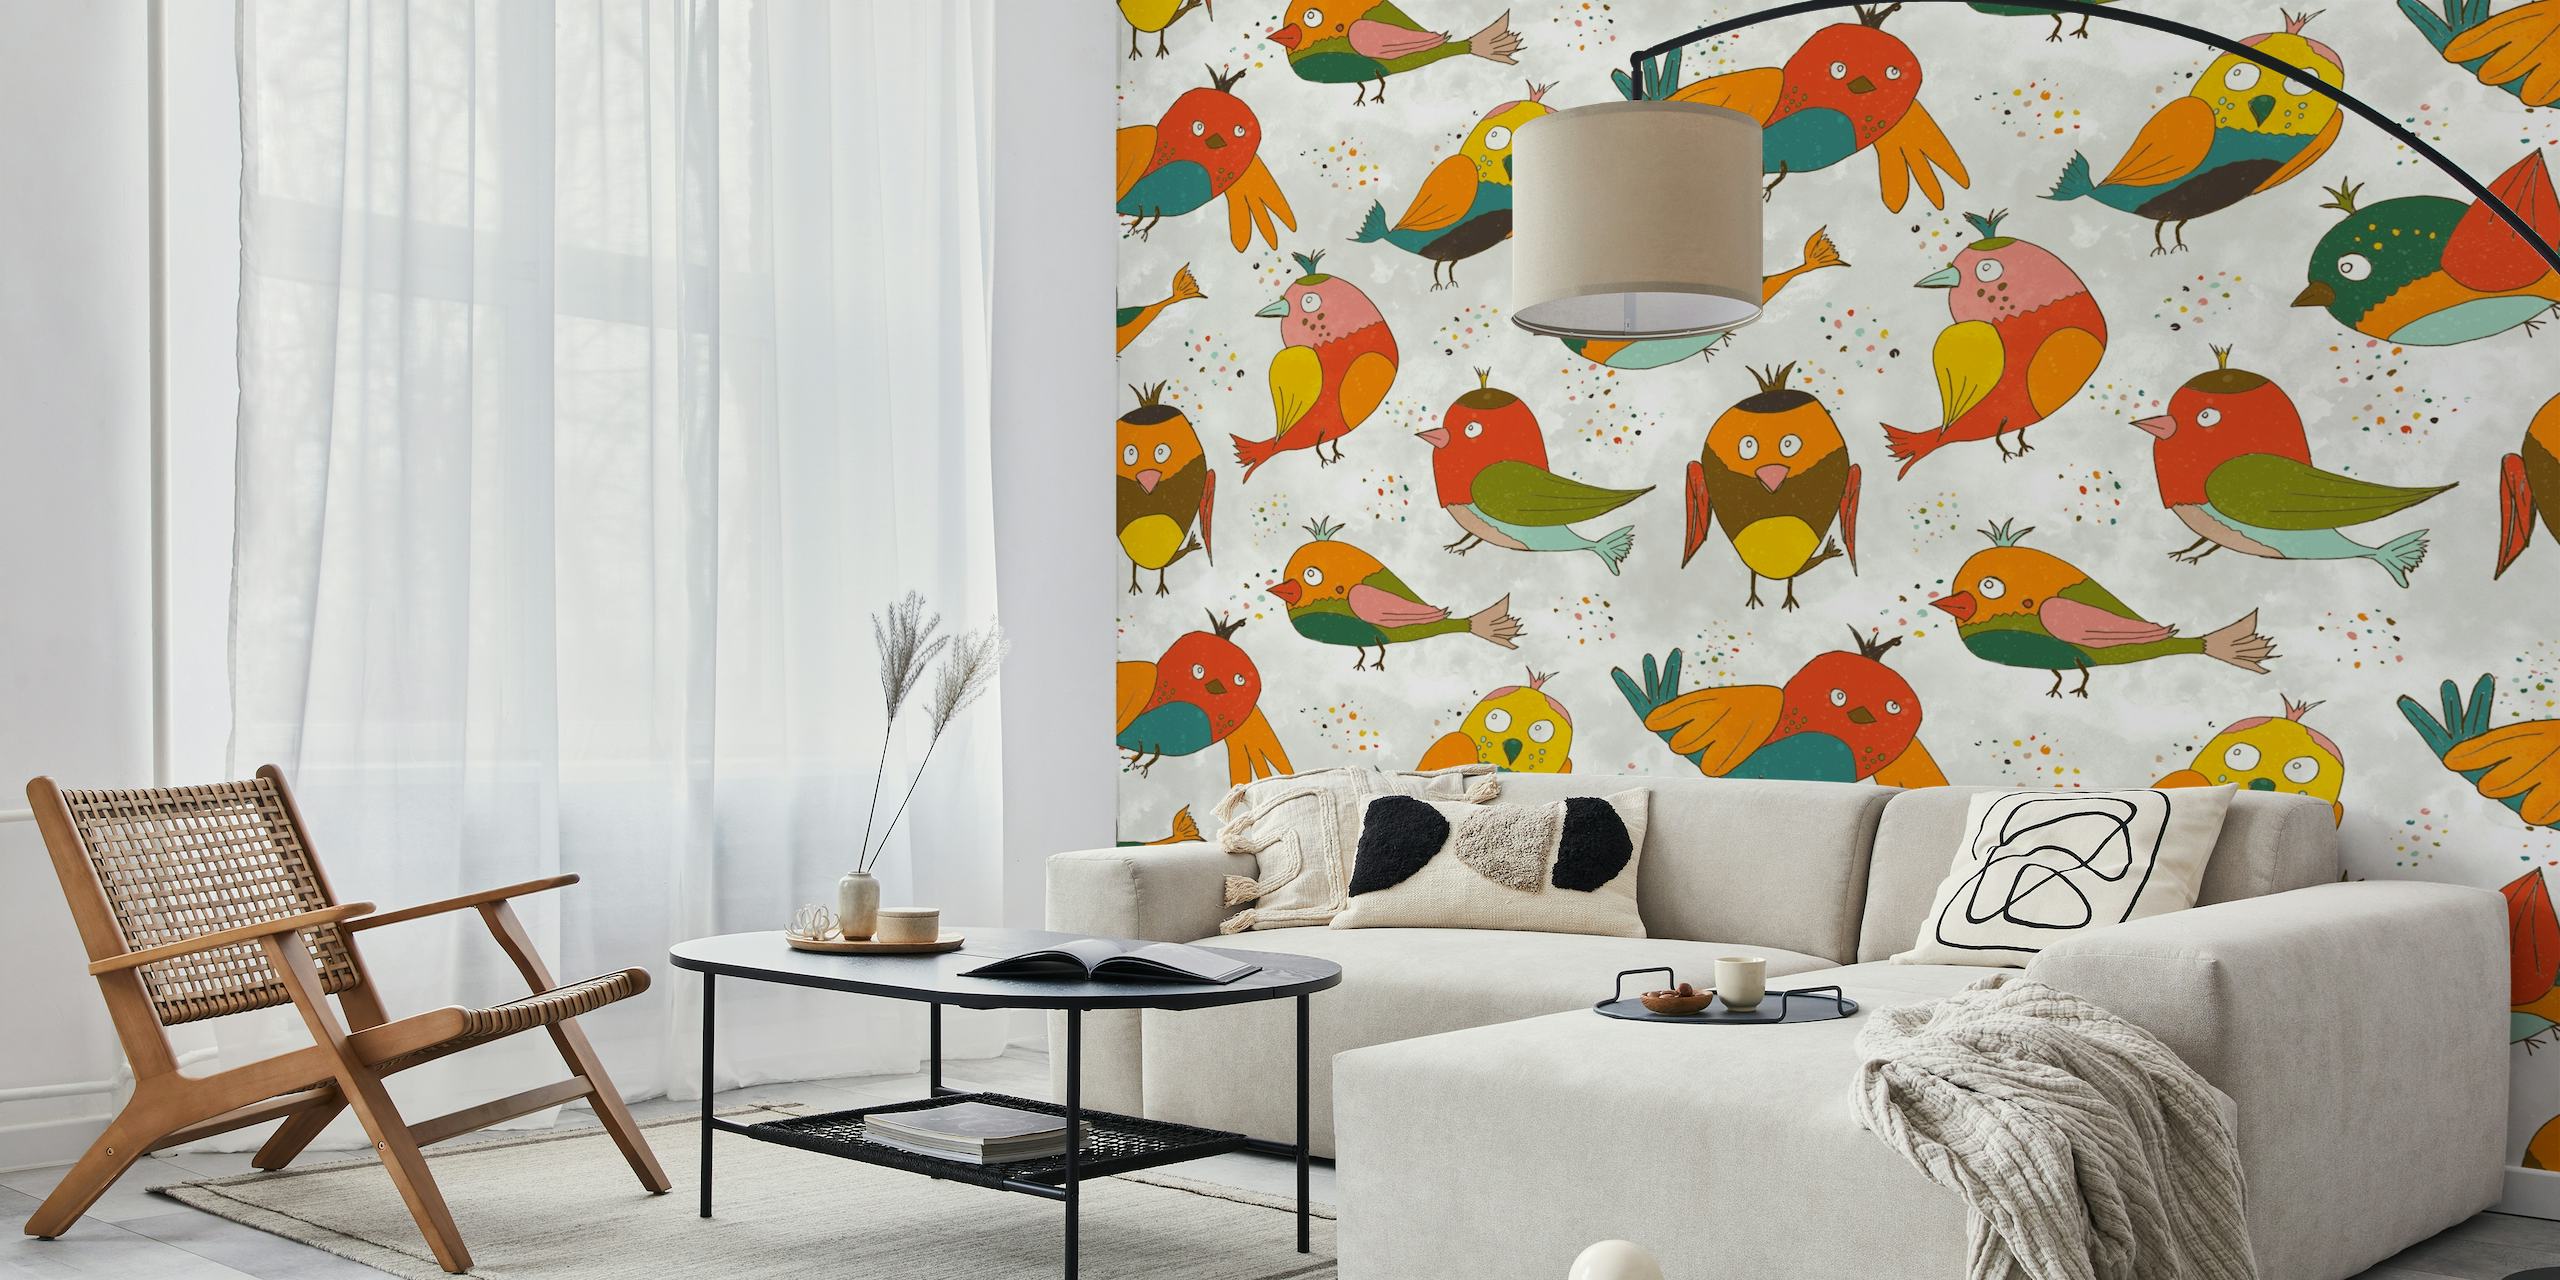 Colorful illustration of spring finch and canary birds wall mural with floral elements